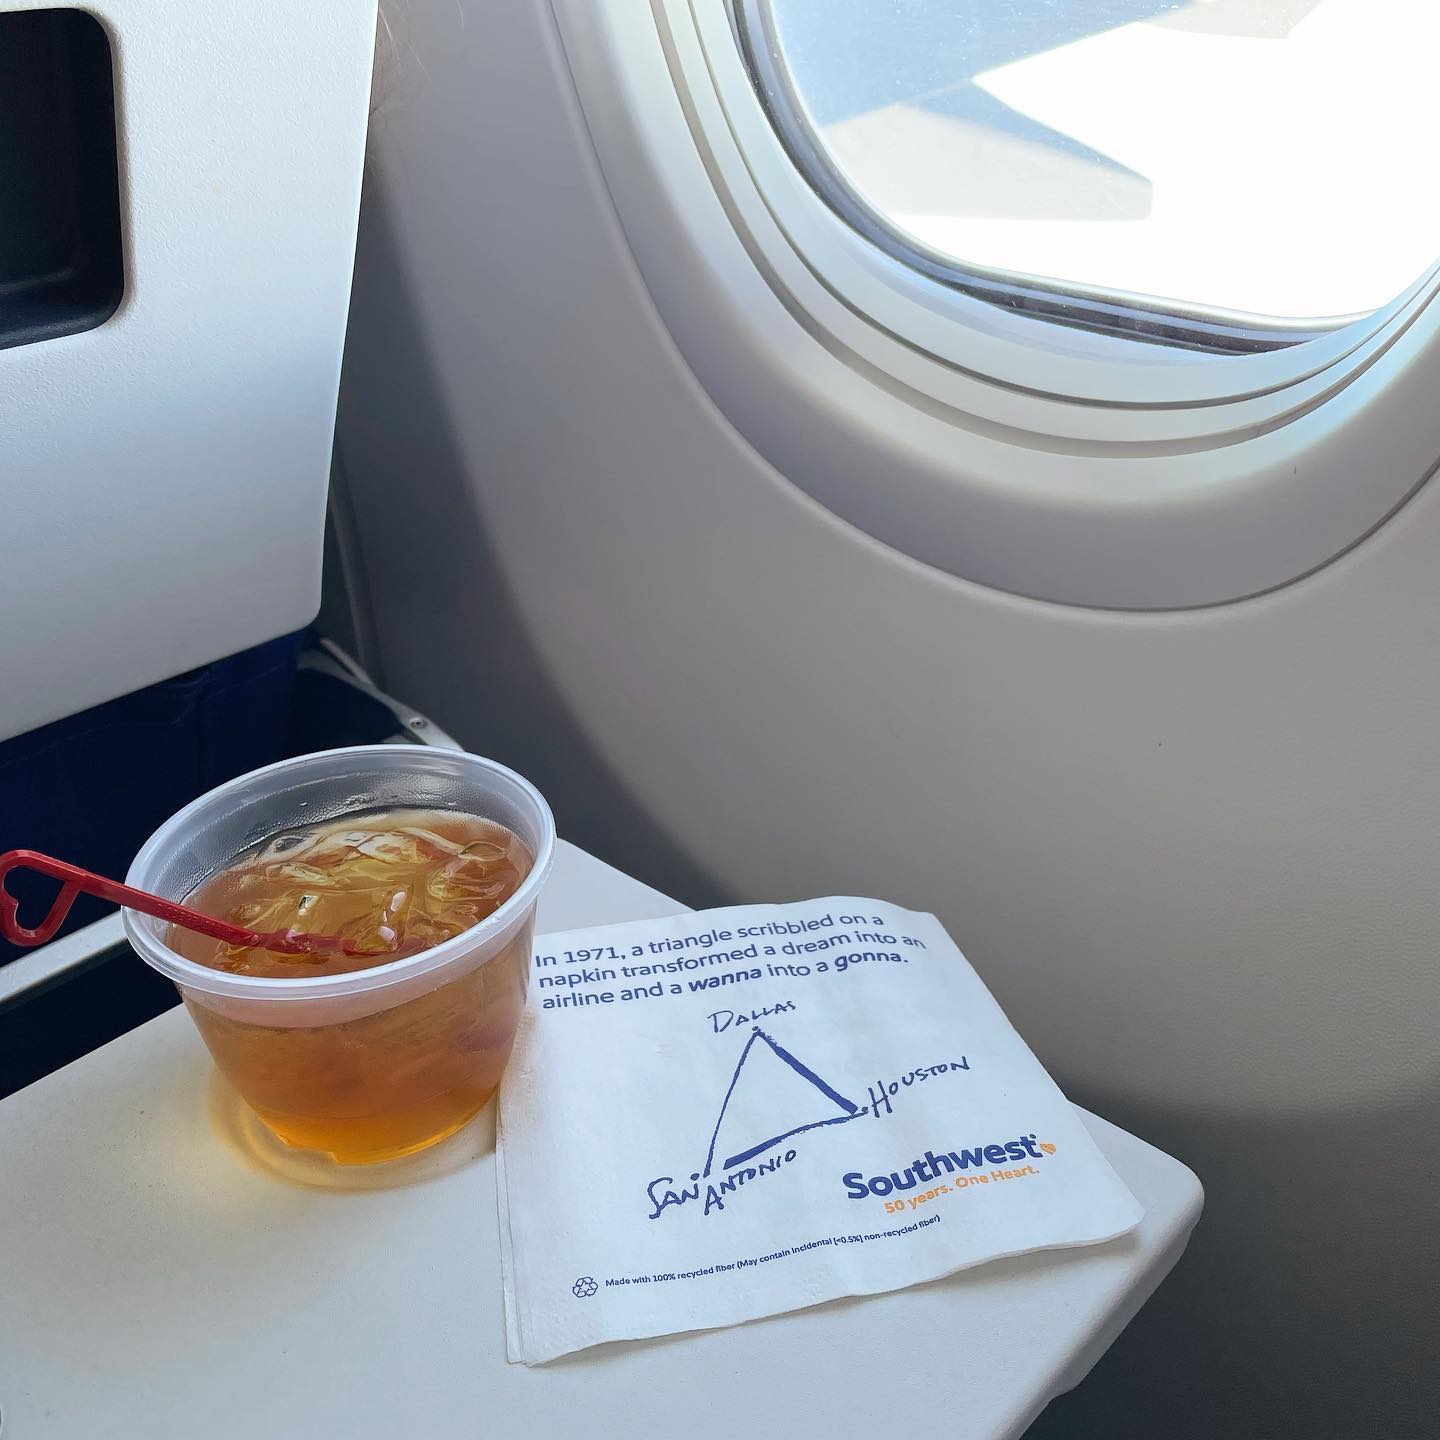 A Wild Turkey toast to Herb and @southwestair (after five and above 30,000 feet).